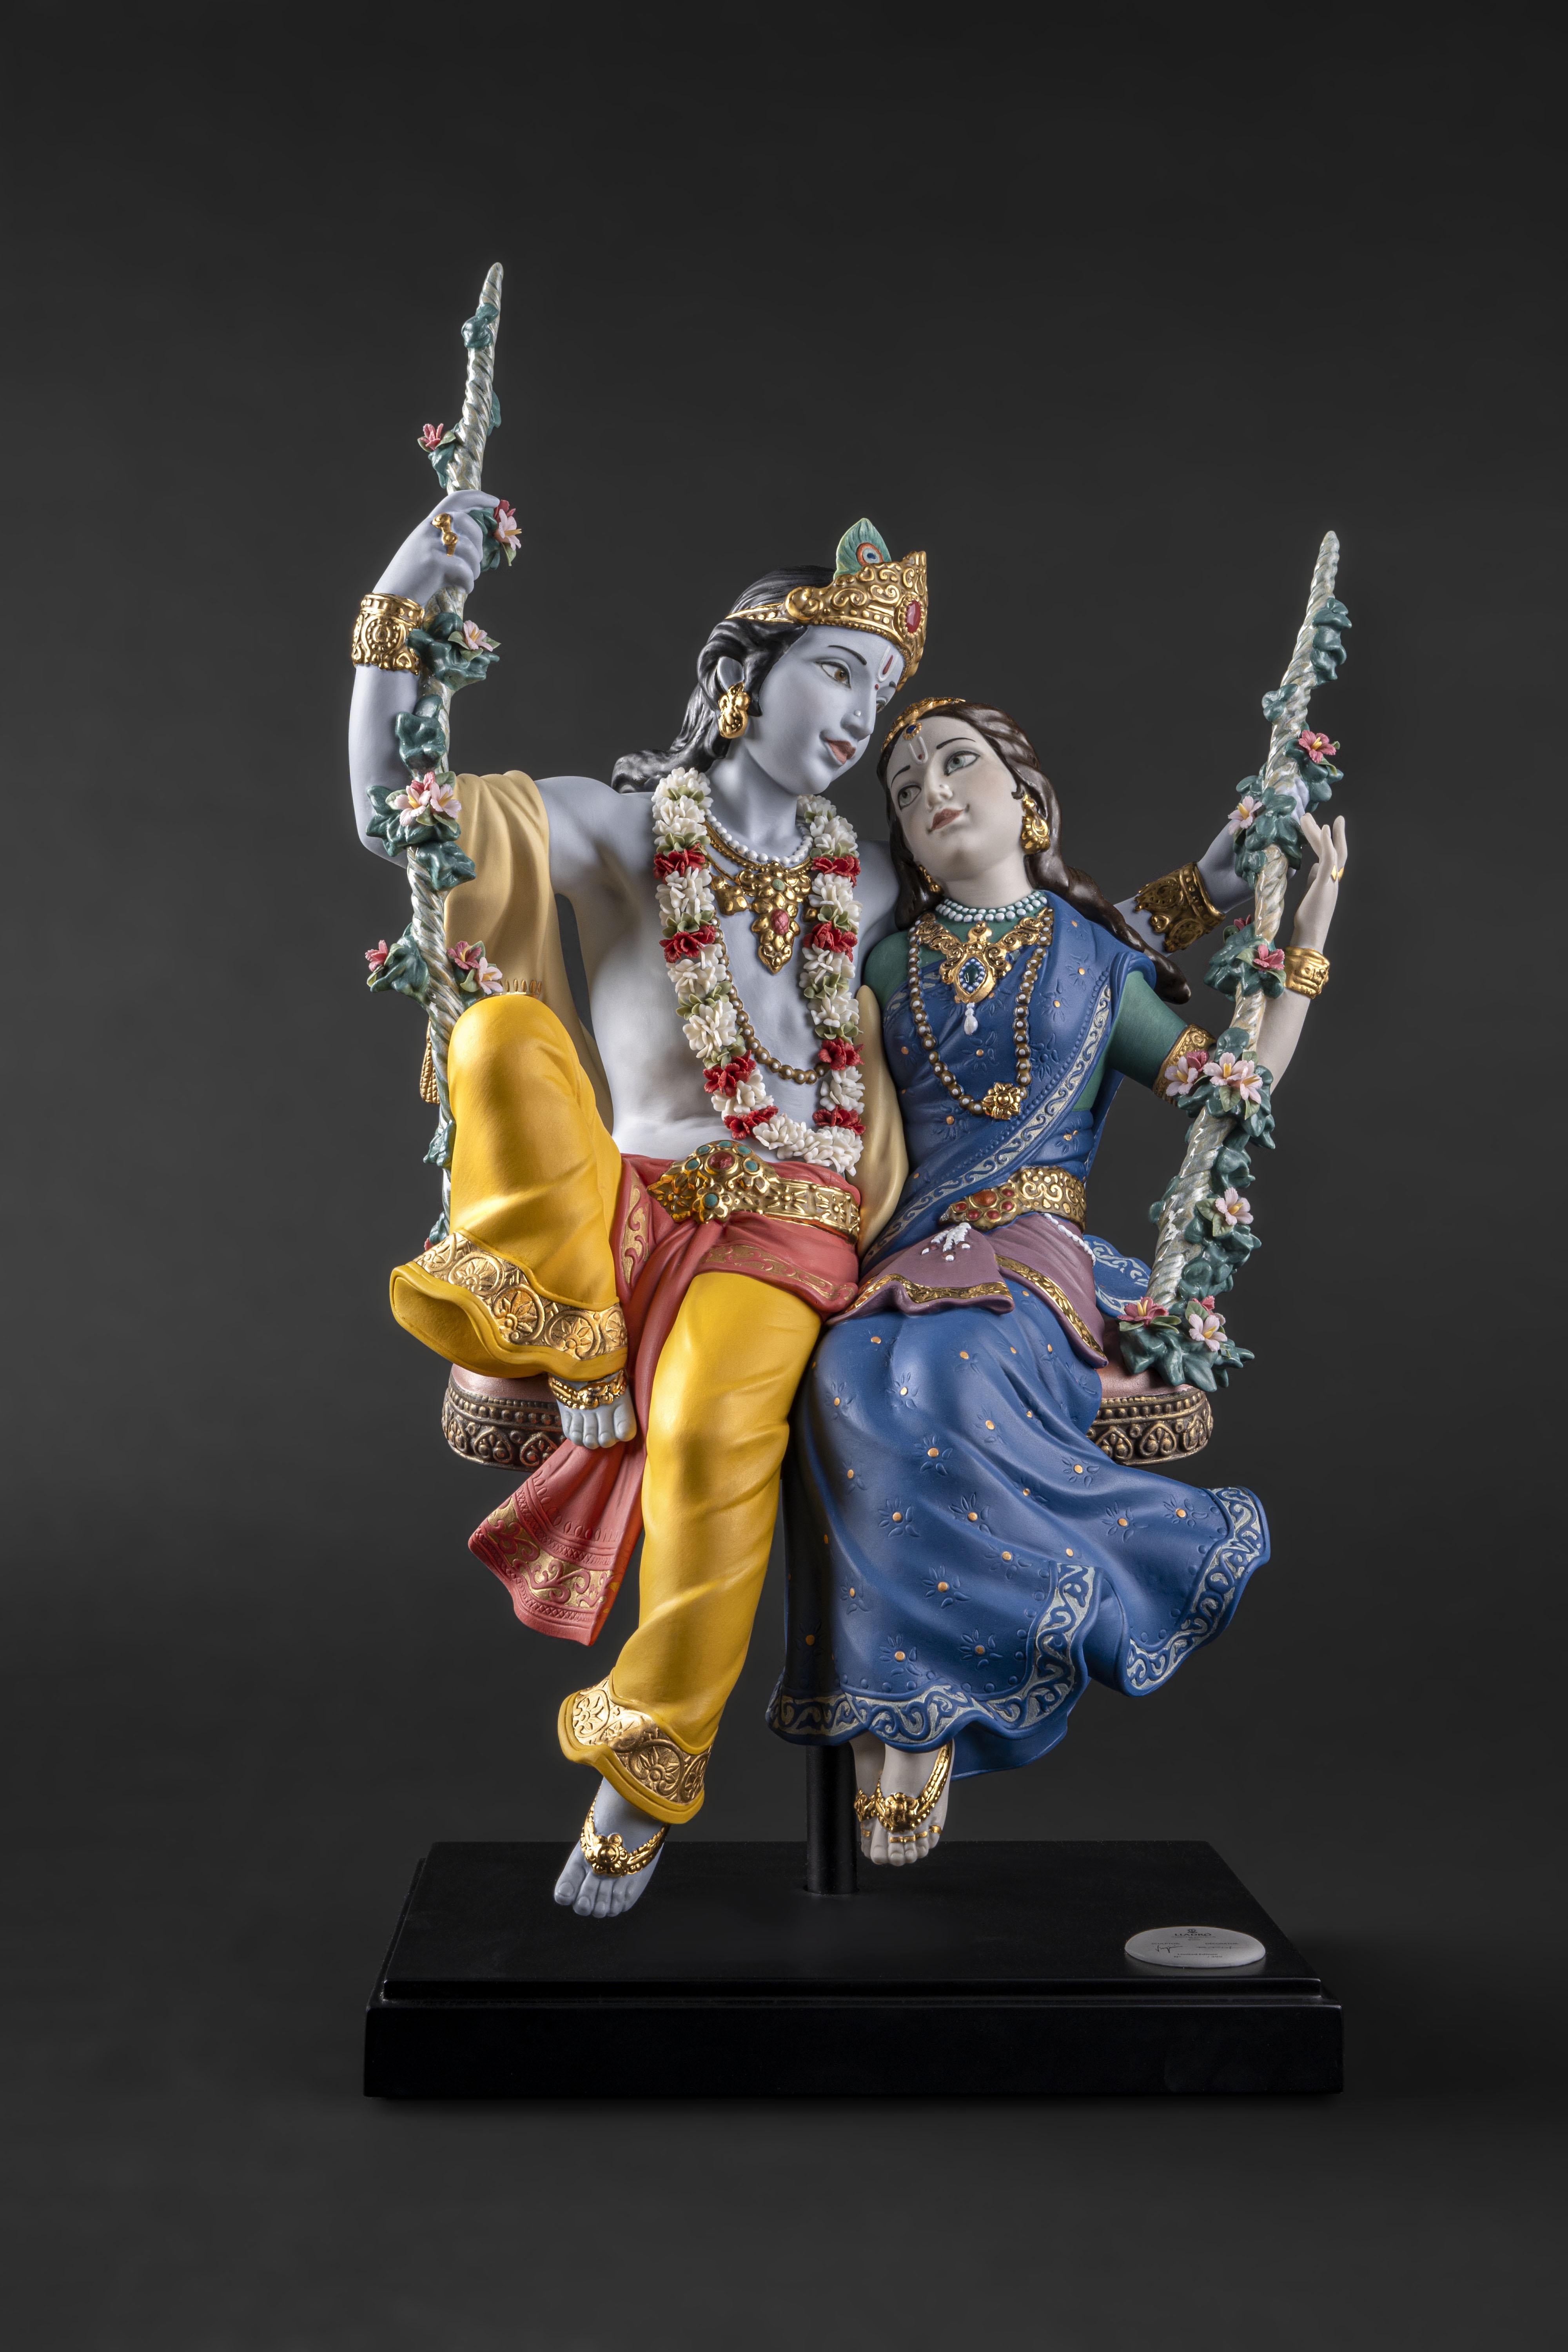 Porcelain sculpture depicting Lord Krishna, one of the most venerated gods in Hinduism, and his beloved Radha in one of the swings from the traditional Jhulan Yatra festival. The love between Radha and Krishna has given rise to some wonderful fables